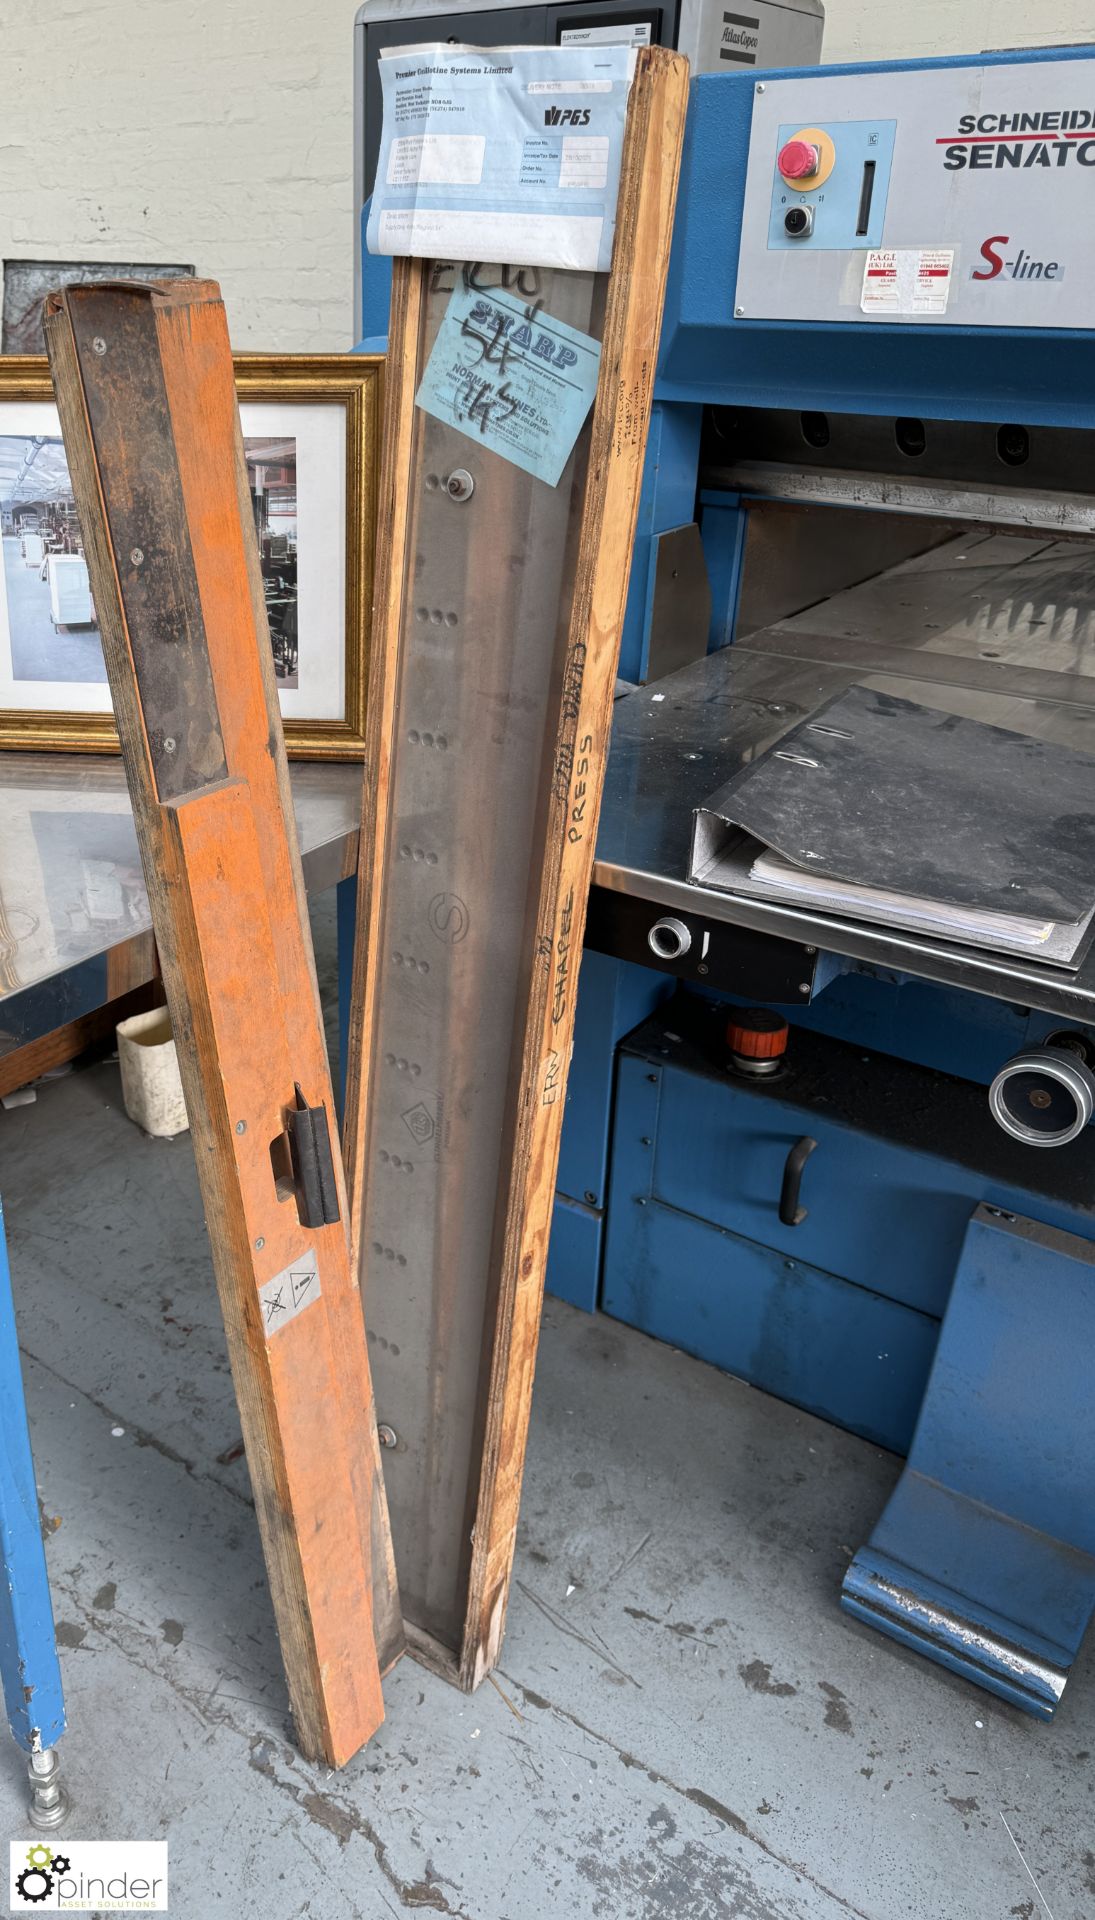 Schneider Senator S-Line 115 TSC Guillotine, 115cm, 400volts, year 1997, serial number M-115H-004- - Image 13 of 14